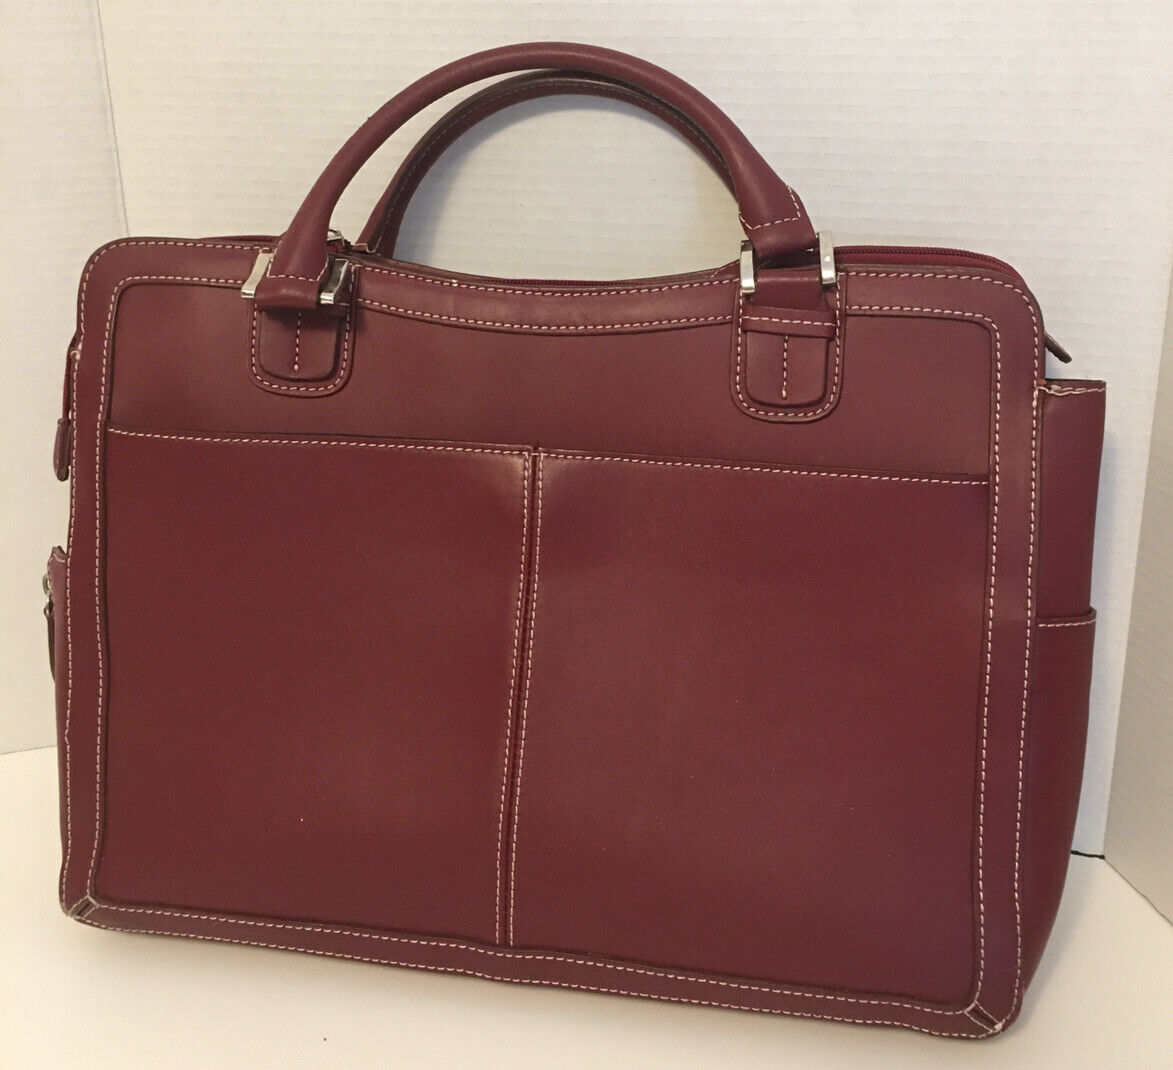 Franklin Covey Classic Leather Briefcase Handle Bag Burgundy